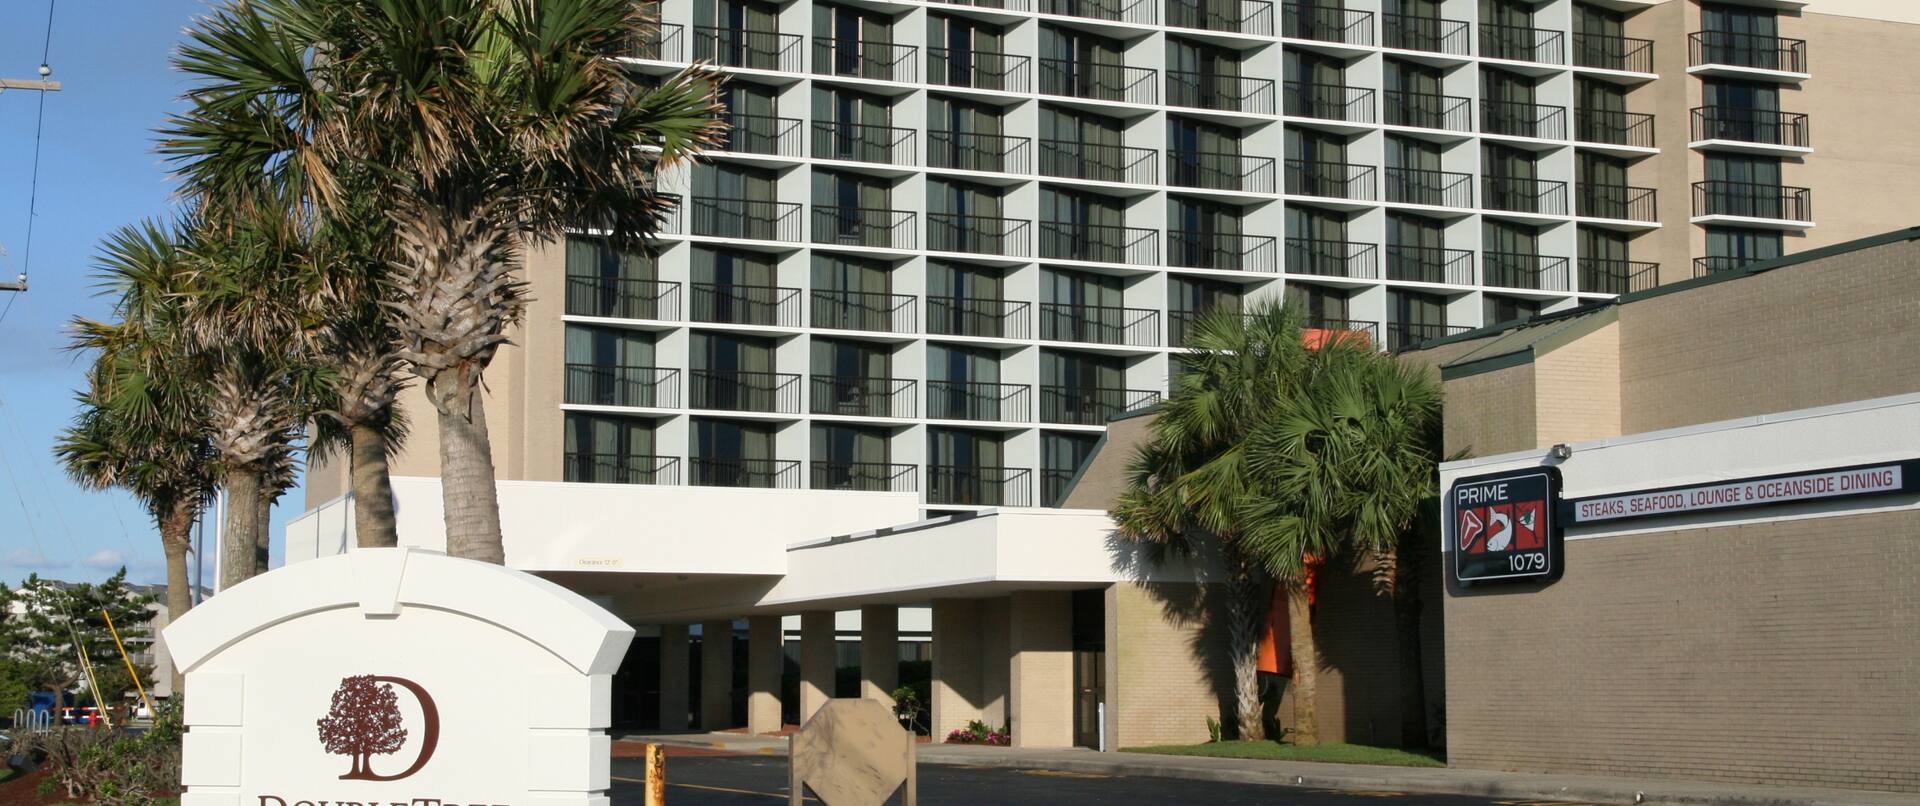 Daytime View of Hotel Signage, Exterior, and Landscaping